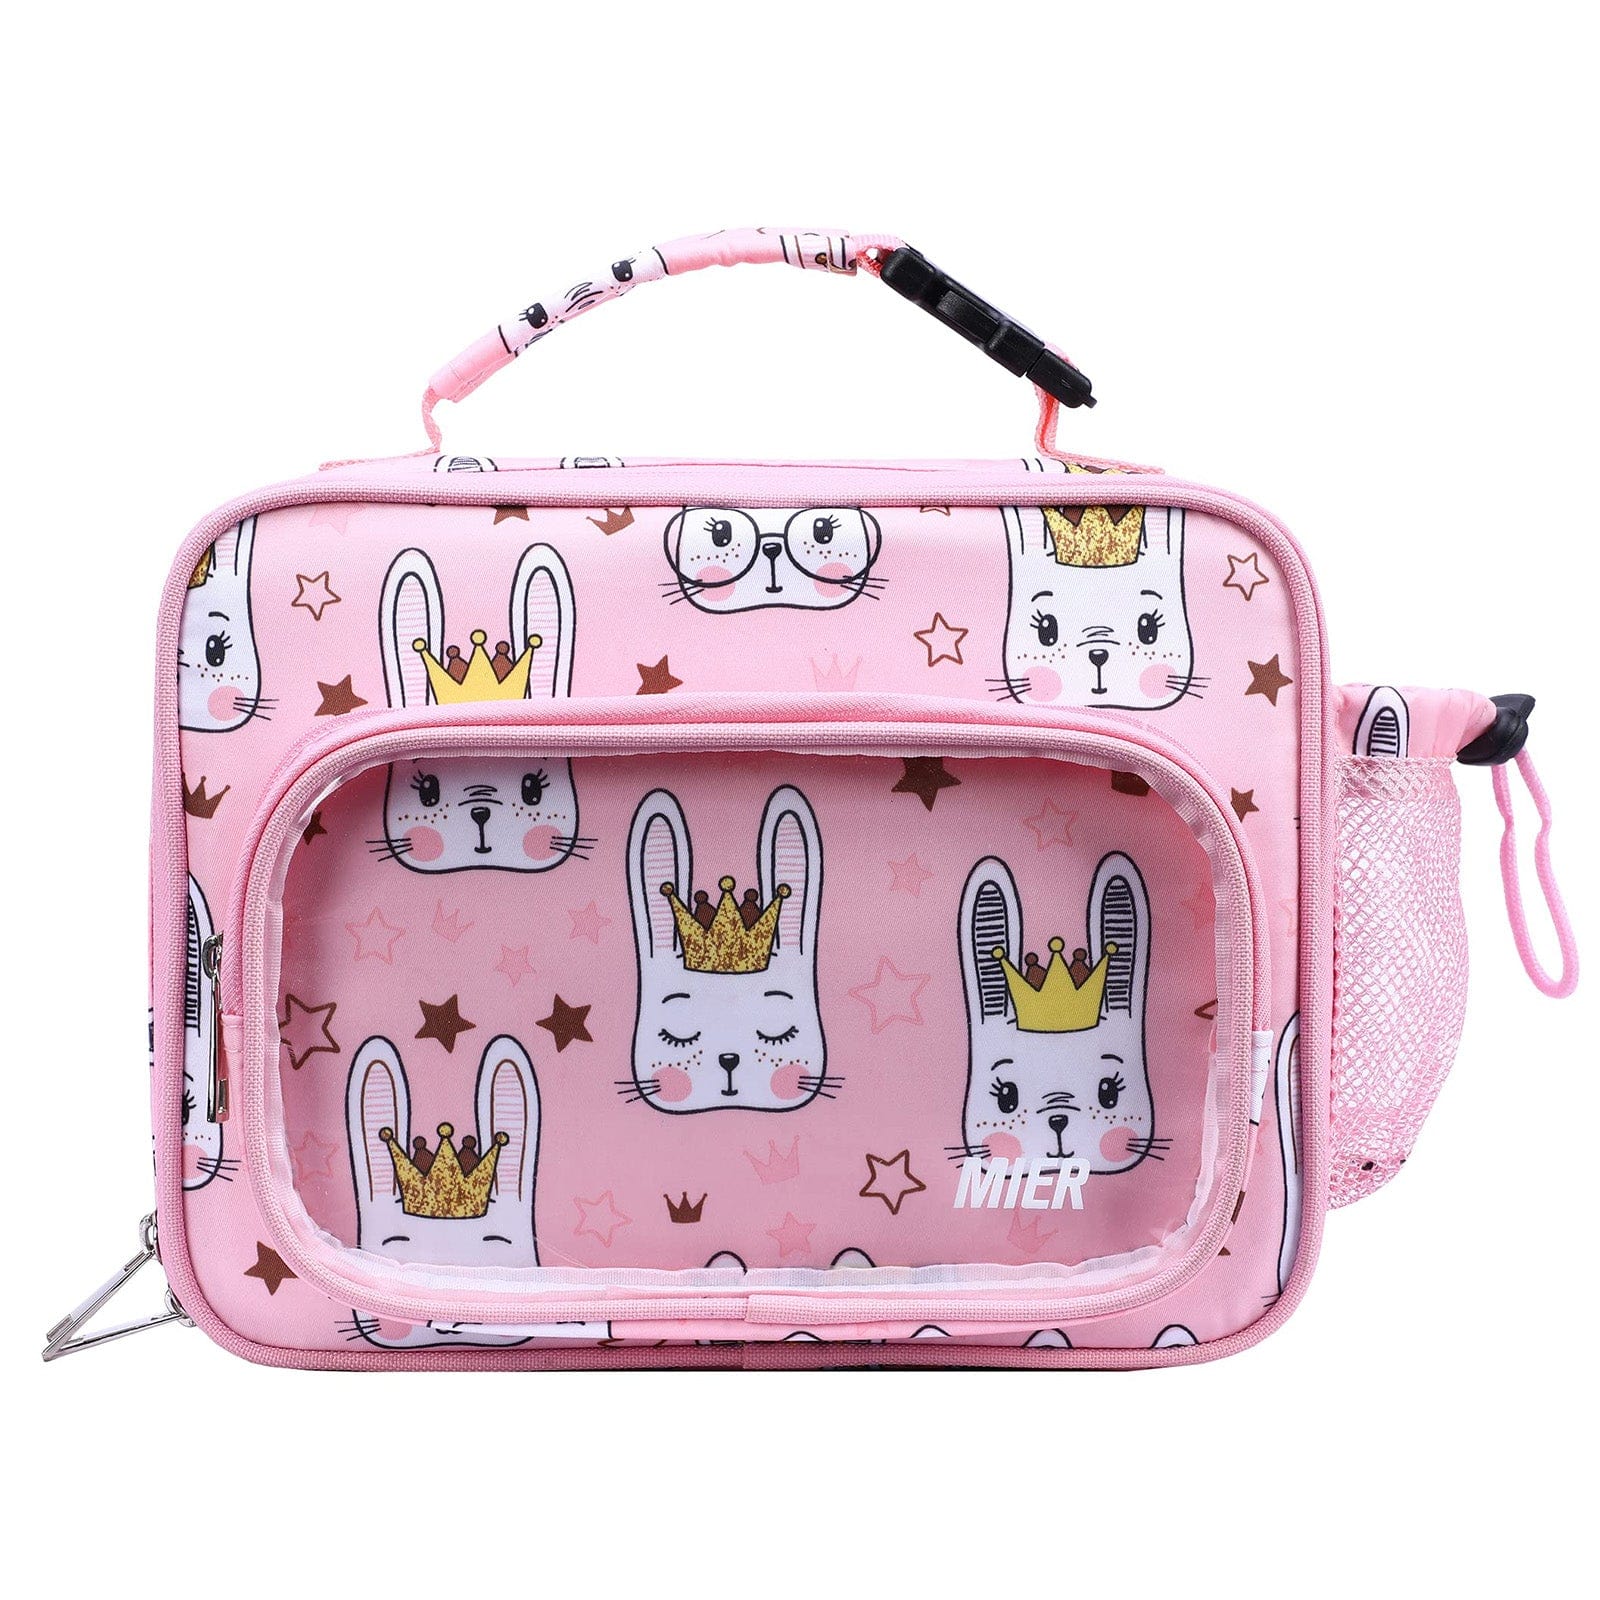 Has The Cutest Lunch Boxes for Kids and I Want Them All